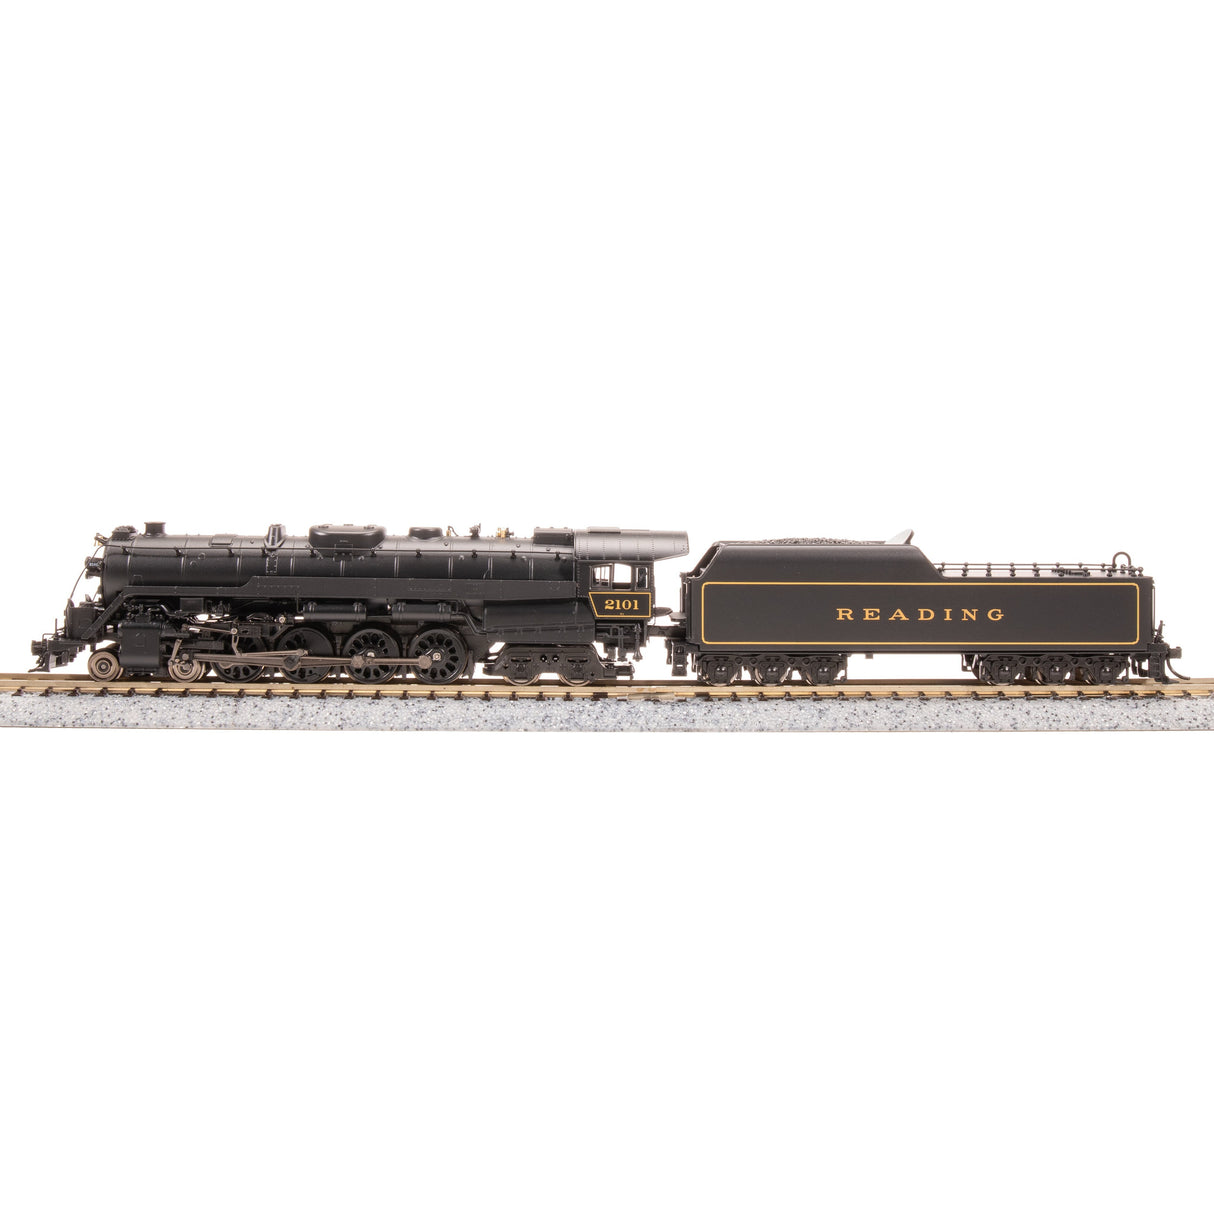 Broadway Limited N Scale Reading T-1 4-8-4 Steam Locomotive #2101/In-Service DC/DCC Sound